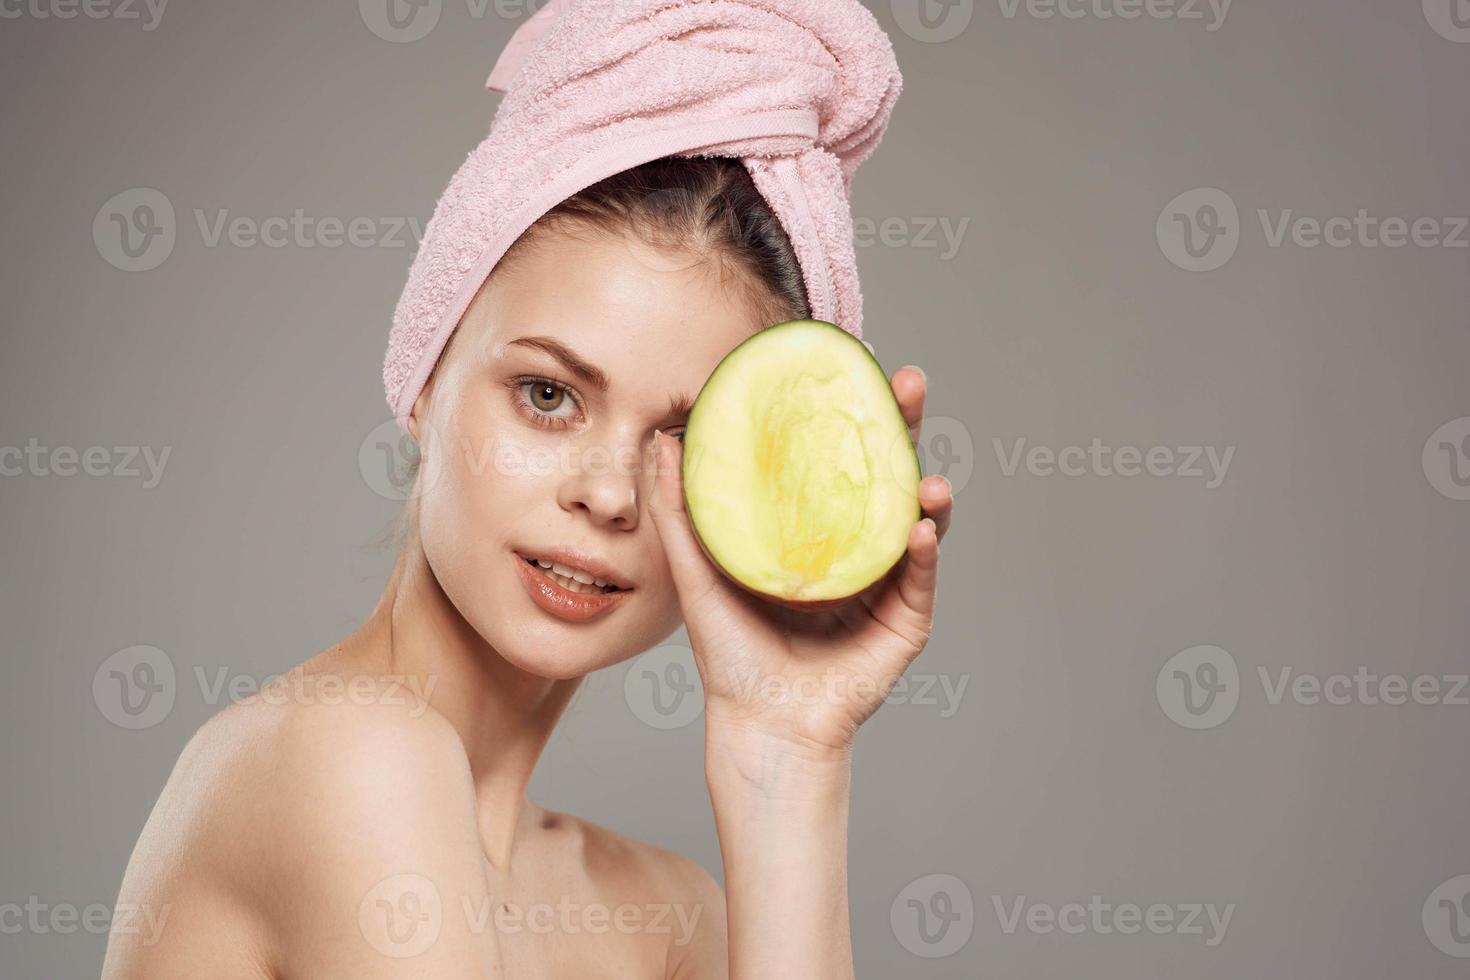 Smiling woman with bare shoulders with towel on head Mango in hand cropped view photo